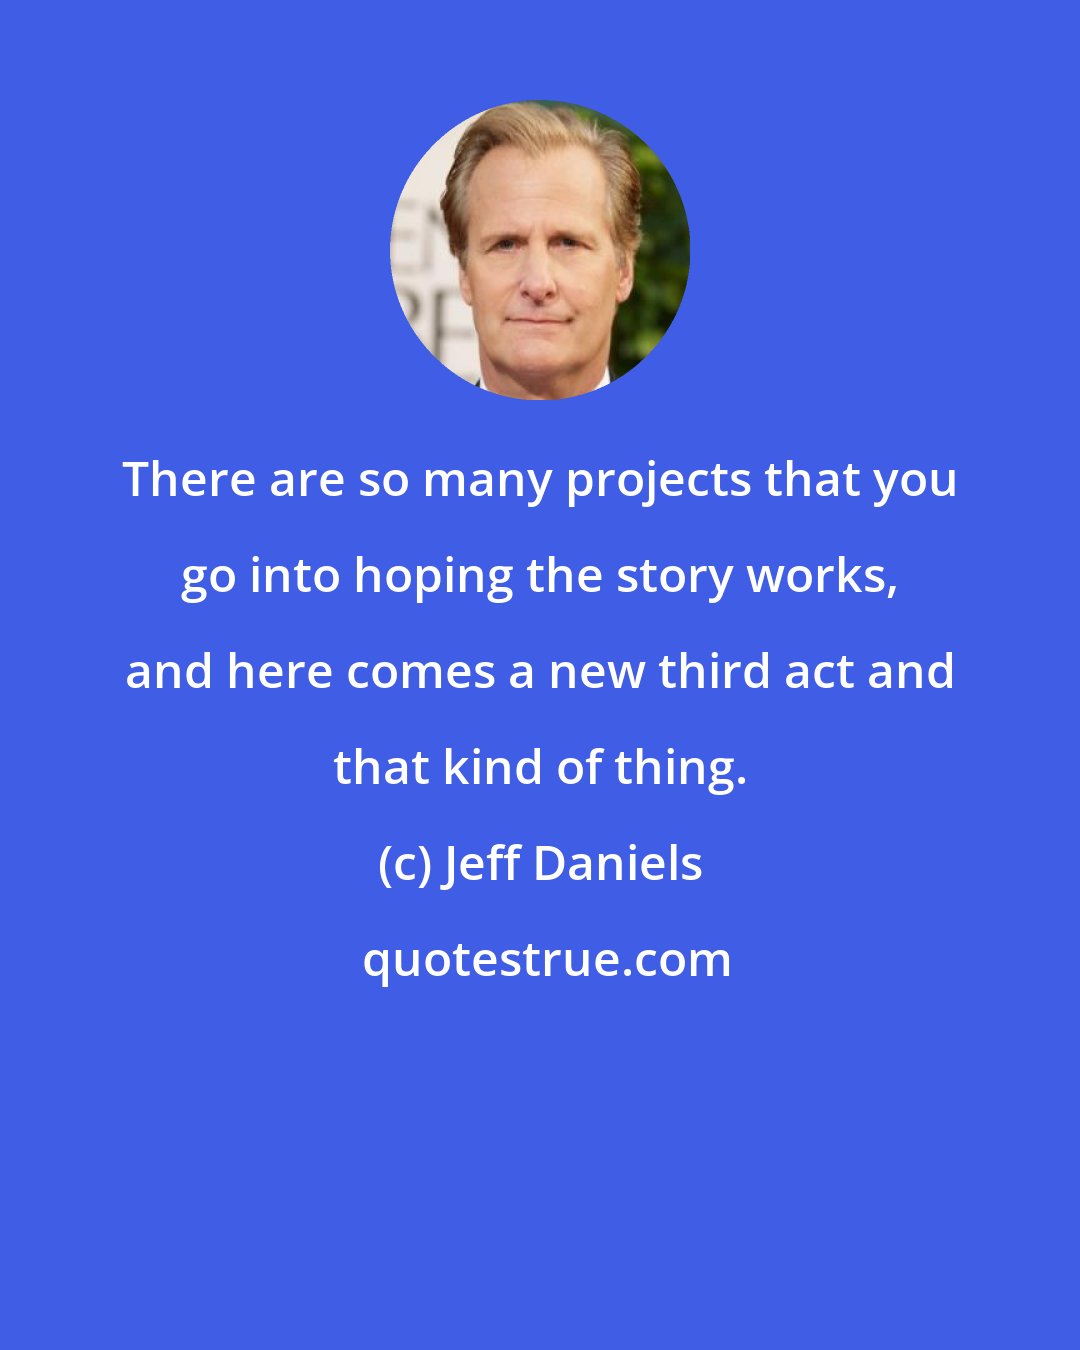 Jeff Daniels: There are so many projects that you go into hoping the story works, and here comes a new third act and that kind of thing.